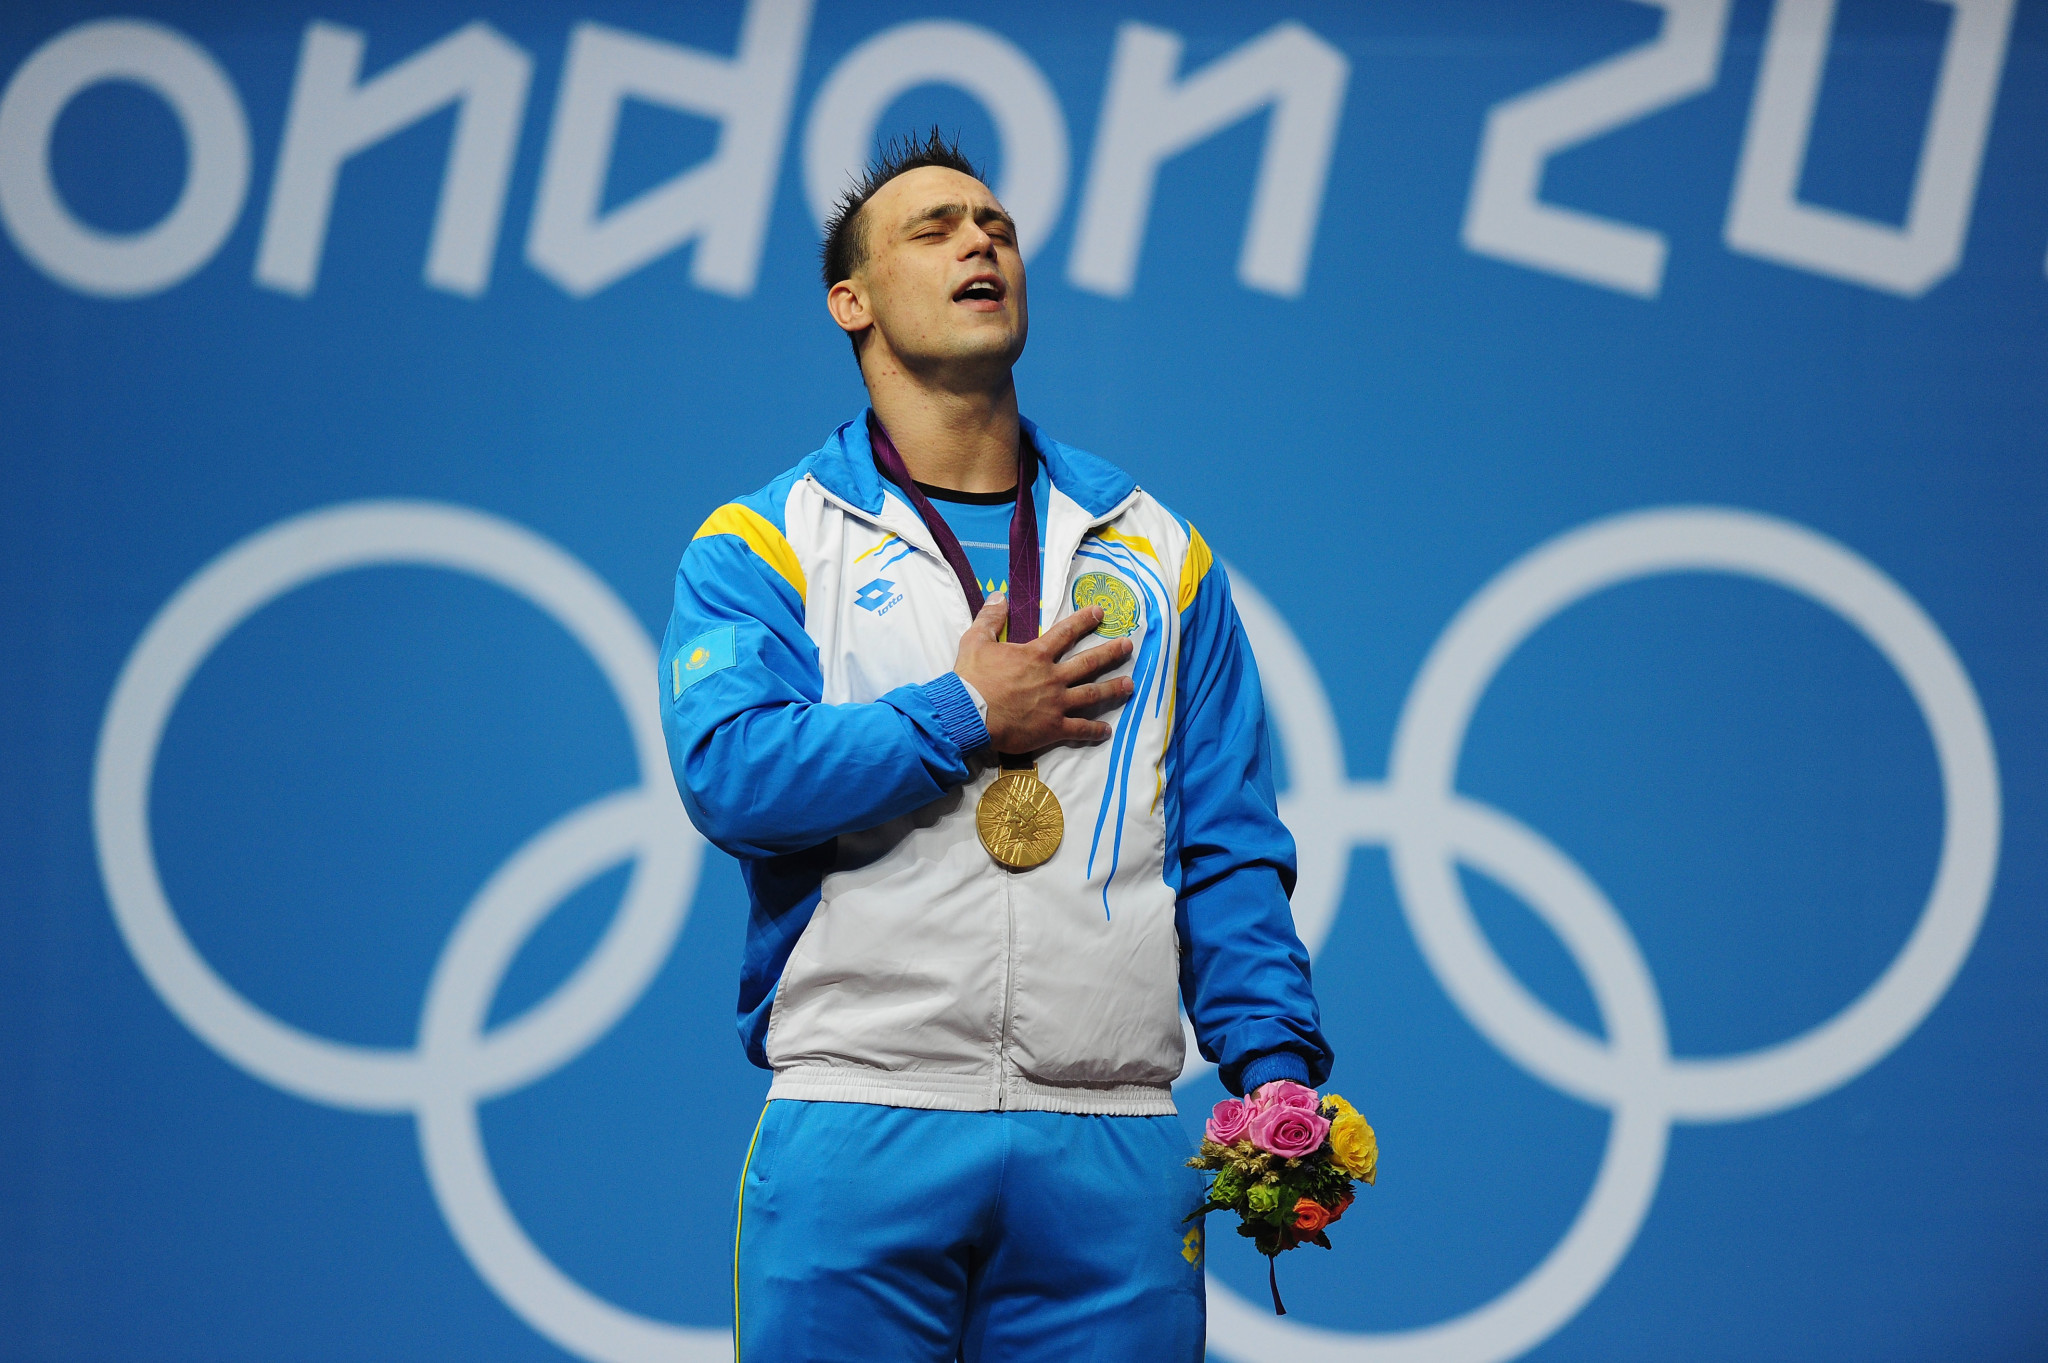 Doubly disqualified weightlifter Ilyin takes first step towards Tokyo 2020 with winning return 